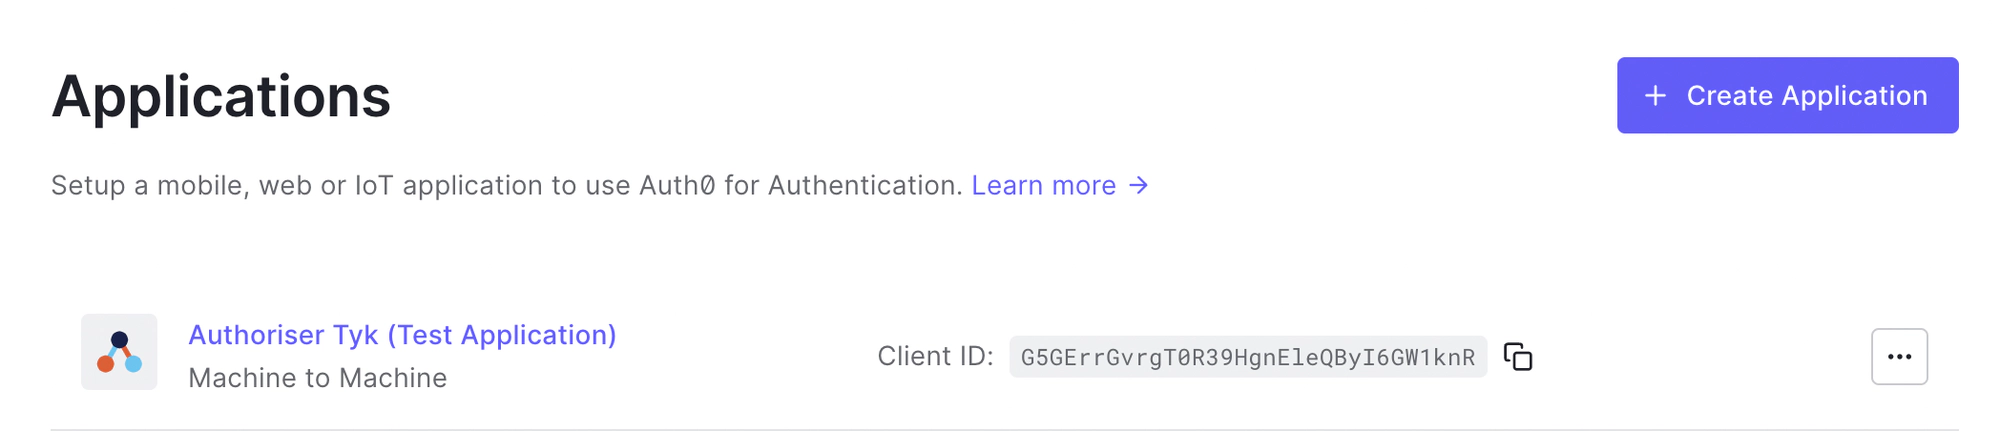 New Auth0 Application